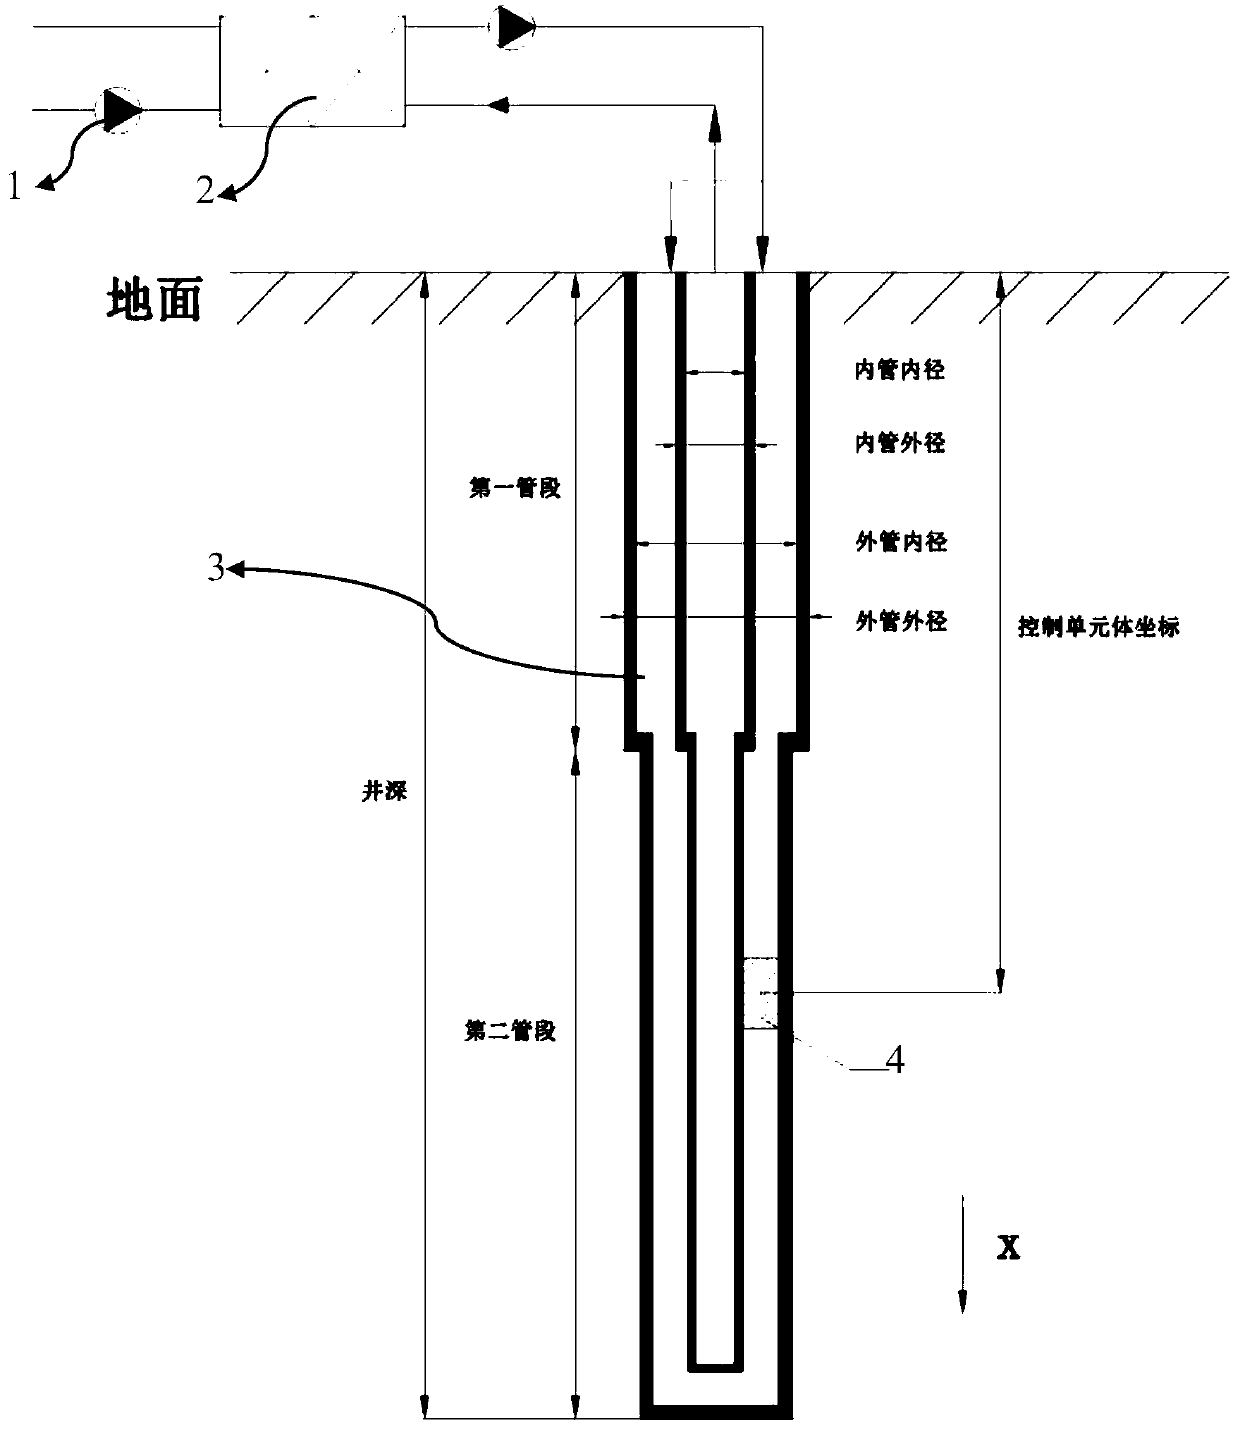 Meshless calculation method for performance of medium-deep buried double-pipe heat exchanger